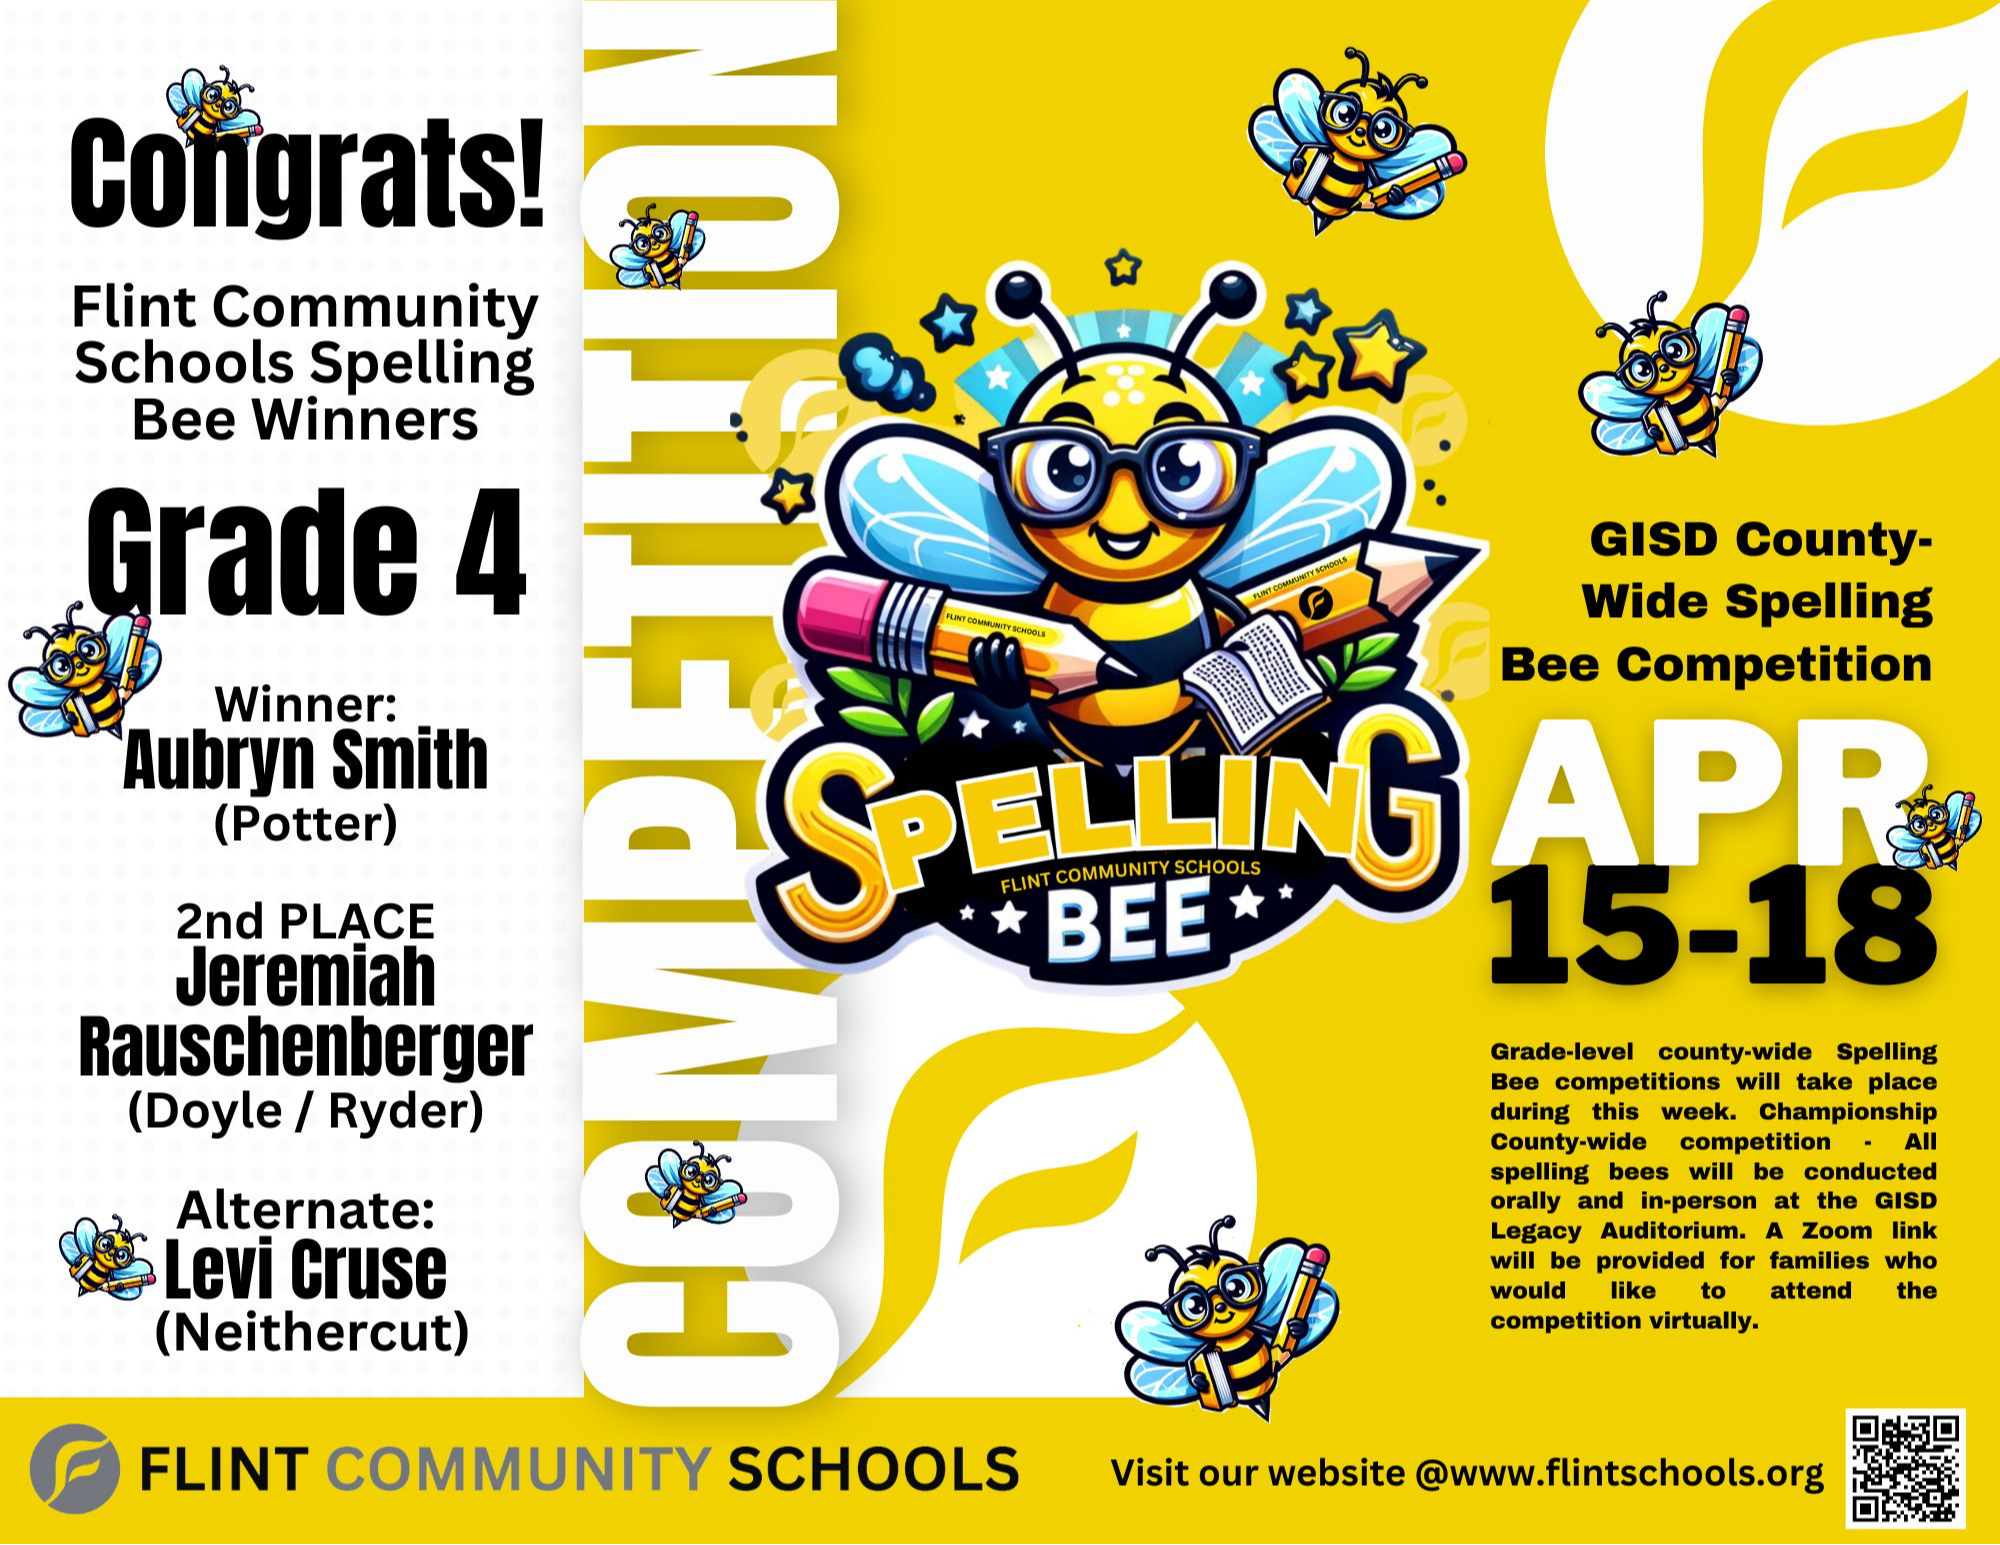 Congratulations to all our Flint Community Schools Spelling Bee Winners! 🐝 Wishing you the best of luck as you represent our district at the GISD competitions. Keep spelling those words with confidence and determination! 📚✨ #SpellingBee #FlintSchools #GoodLuck